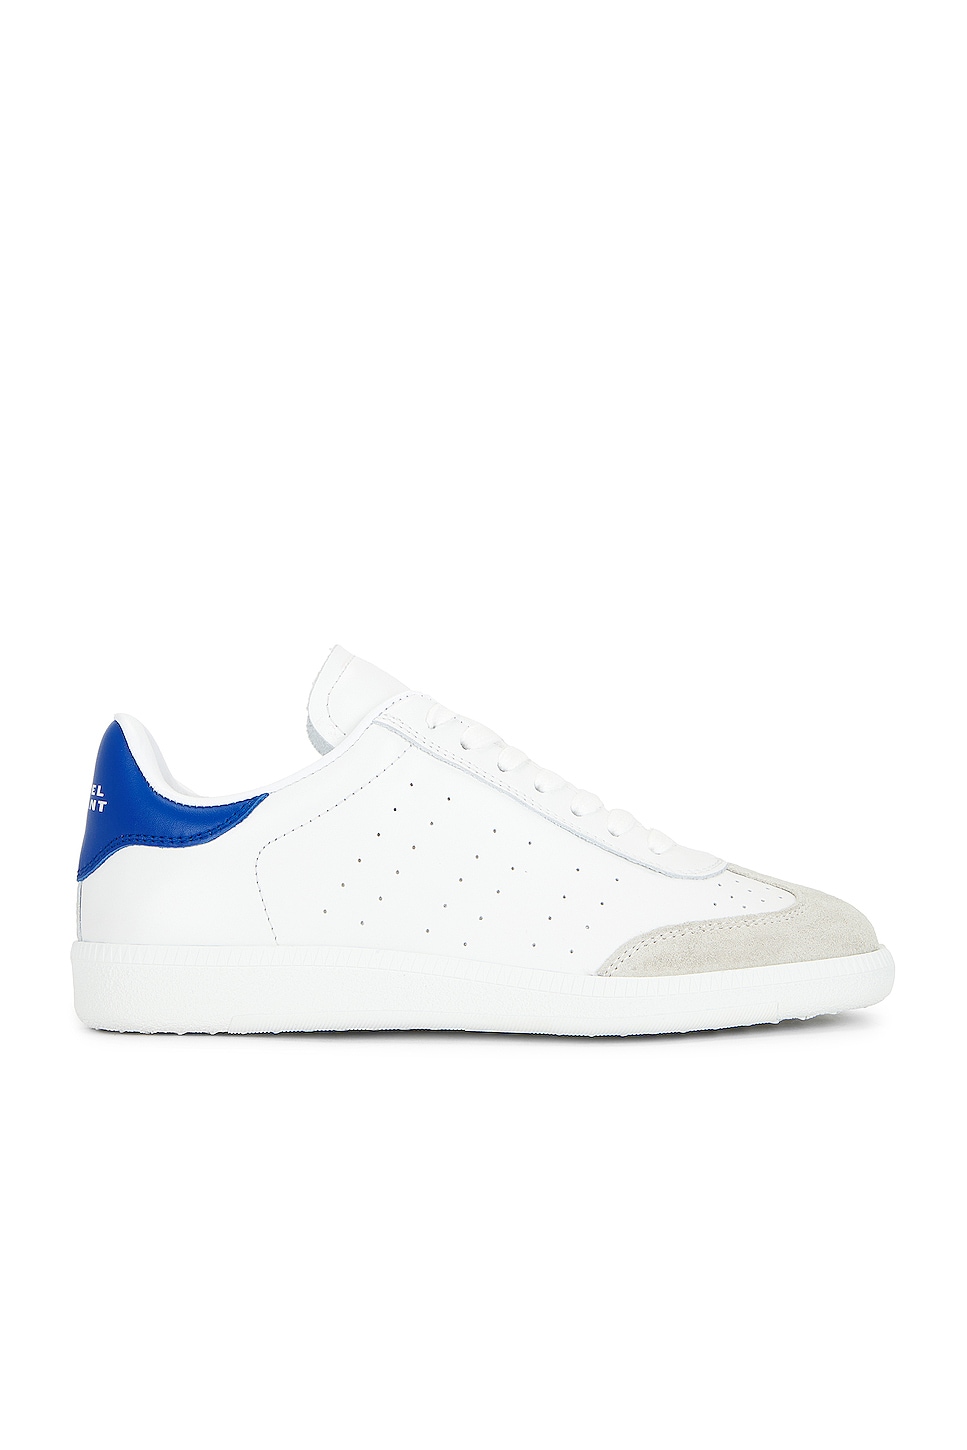 Image 1 of Isabel Marant Bryce Sneaker in Electric Blue